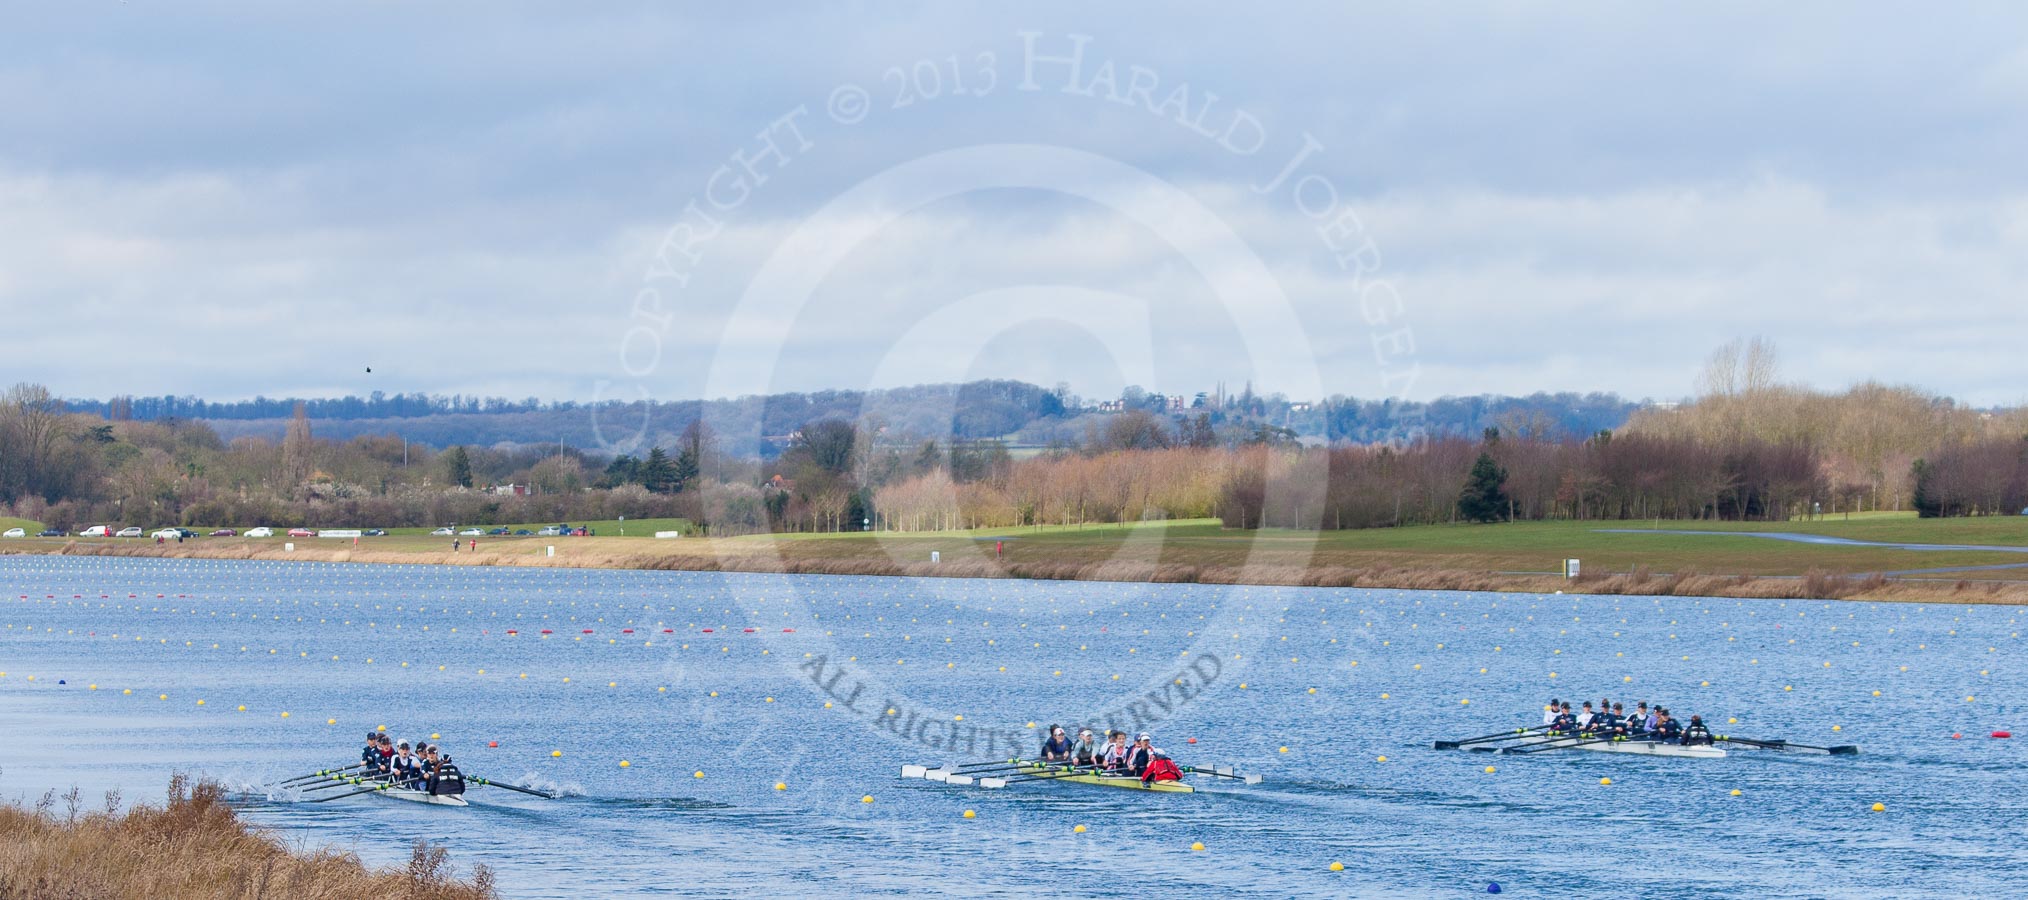 The Boat Race season 2013 - fixture OUWBC vs Olympians: Racing down Dorney Lake, on the left the OUWBC Blue Boat, in the middle the Olympians, and on the right Osiris, the OUWBC reserve boat..
Dorney Lake,
Dorney, Windsor,
Buckinghamshire,
United Kingdom,
on 16 March 2013 at 11:56, image #174